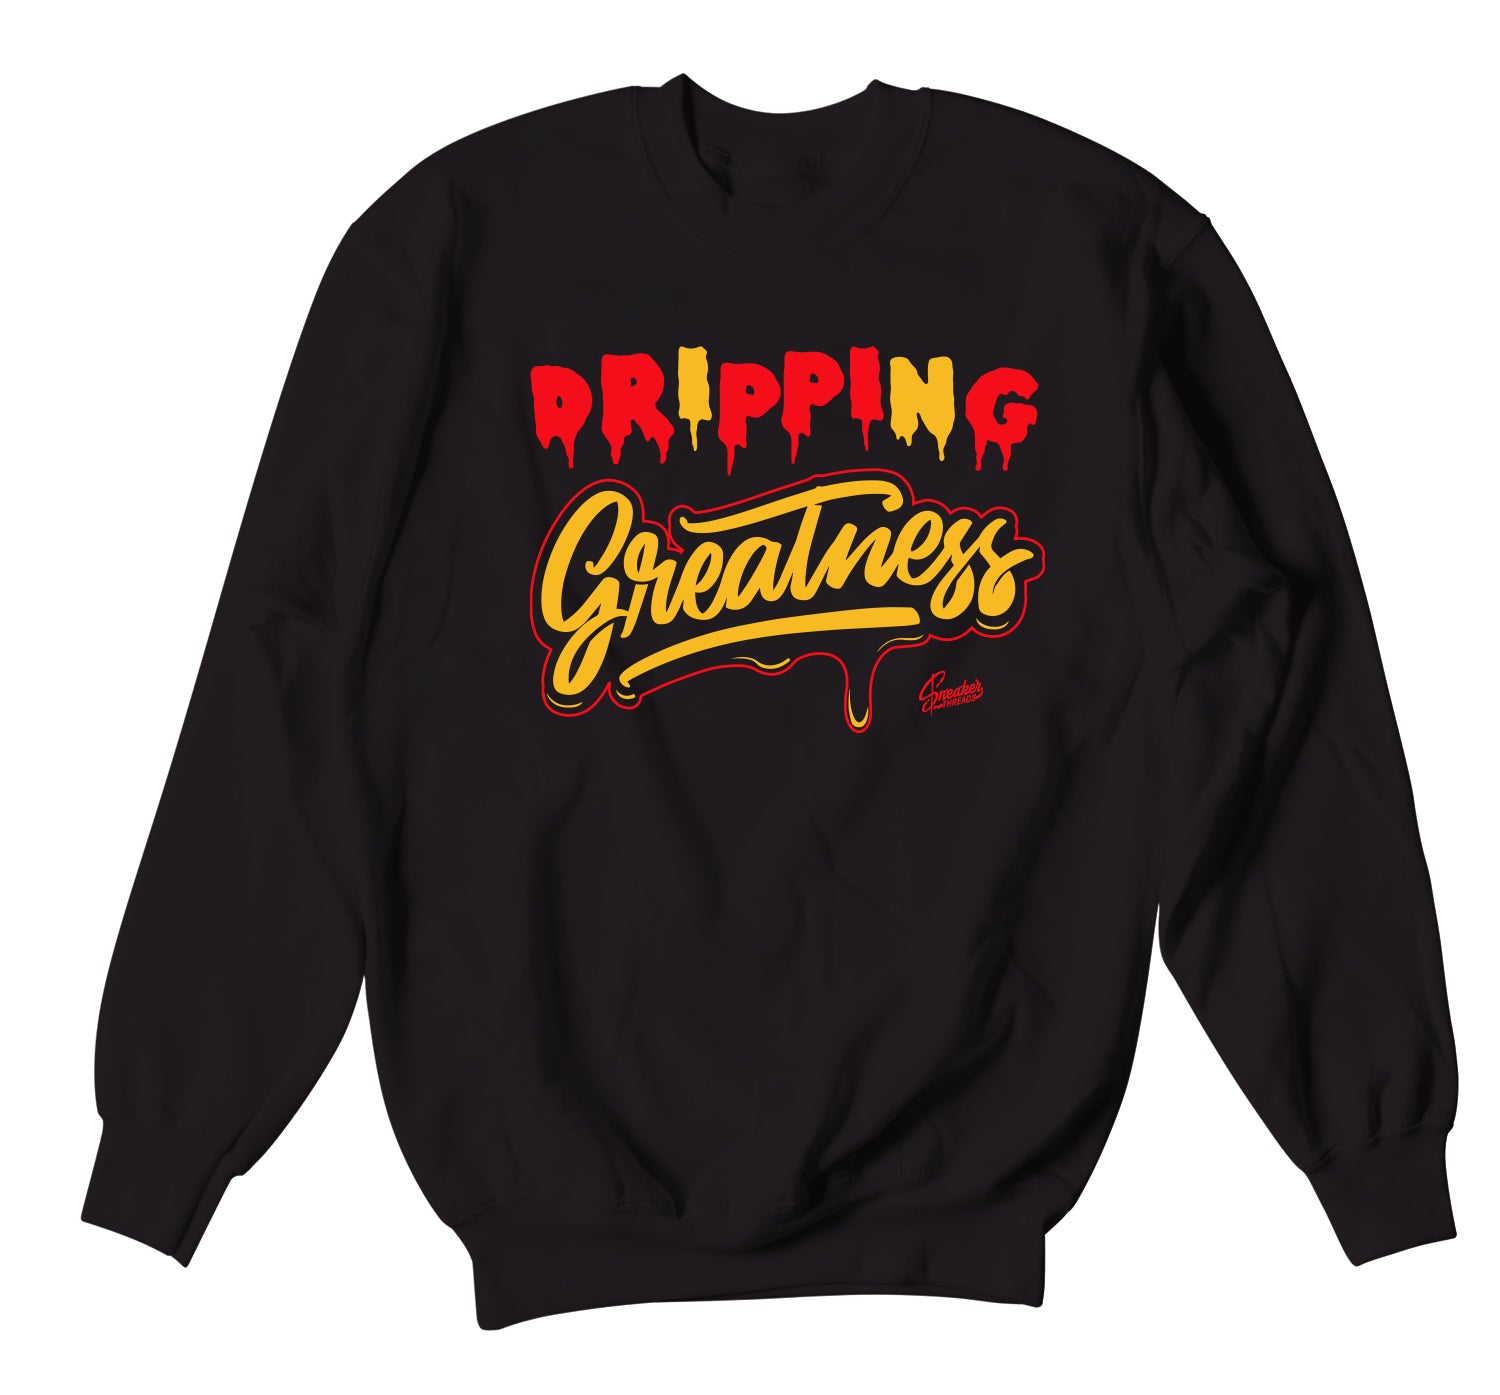 All Star 2020 Trophies Sweater  - Dripping Greatness - Black